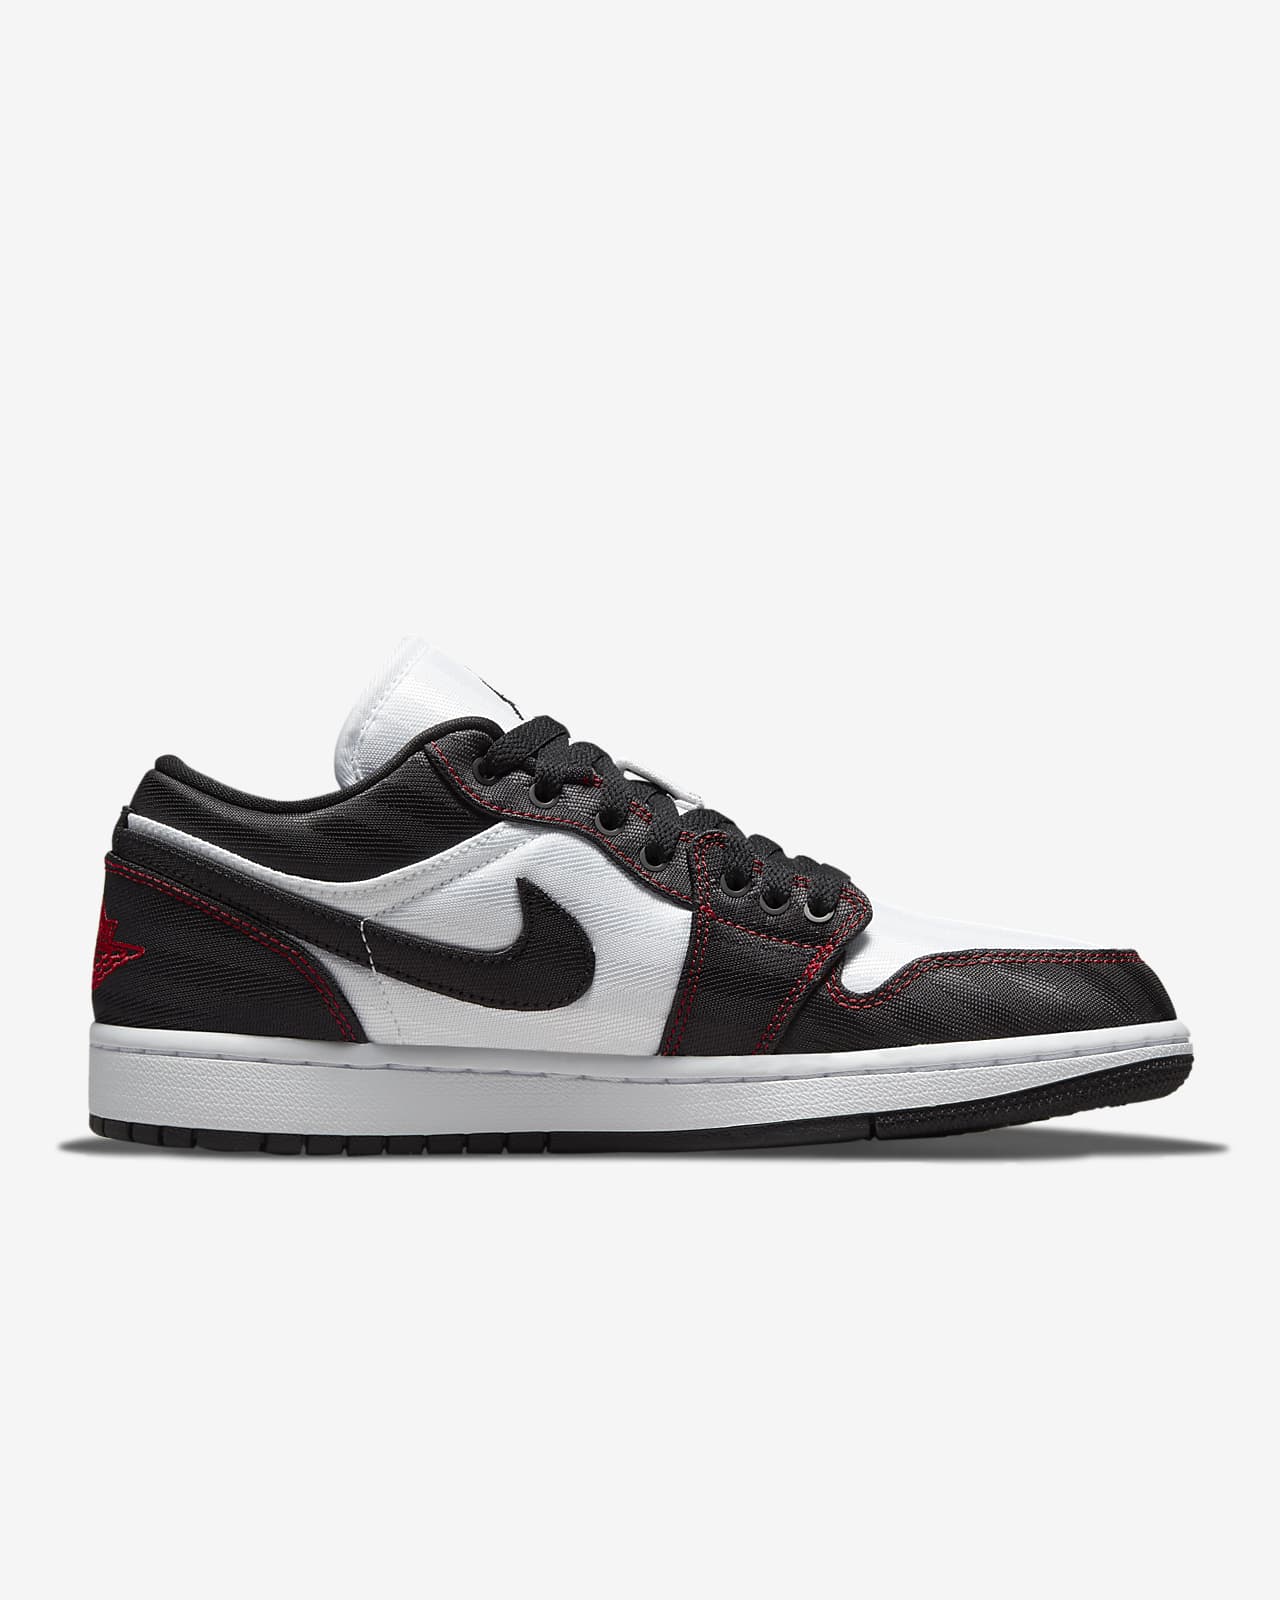 Dairy products deepen Deny Air Jordan 1 Low SE Women's Shoes. Nike.com